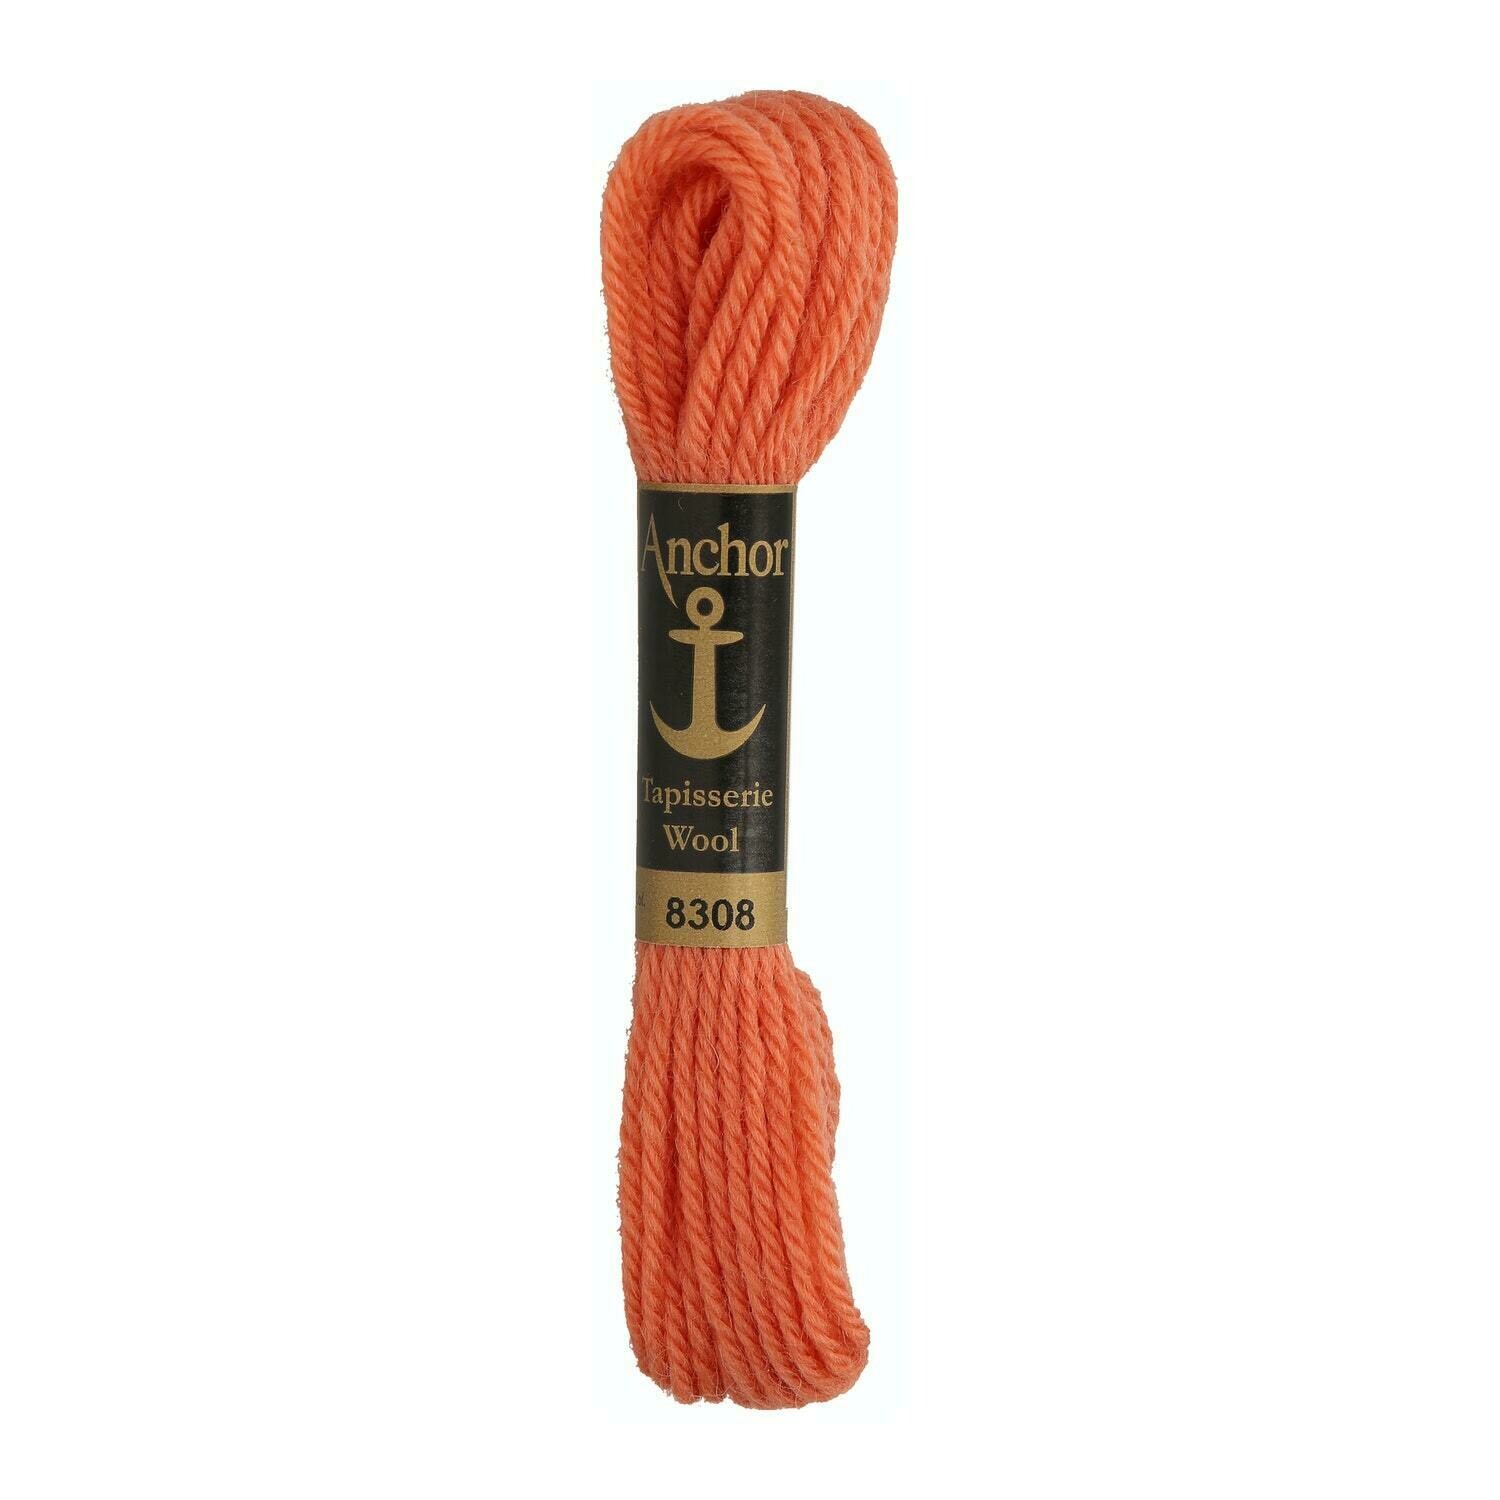 Anchor Tapisserie Wool #08308